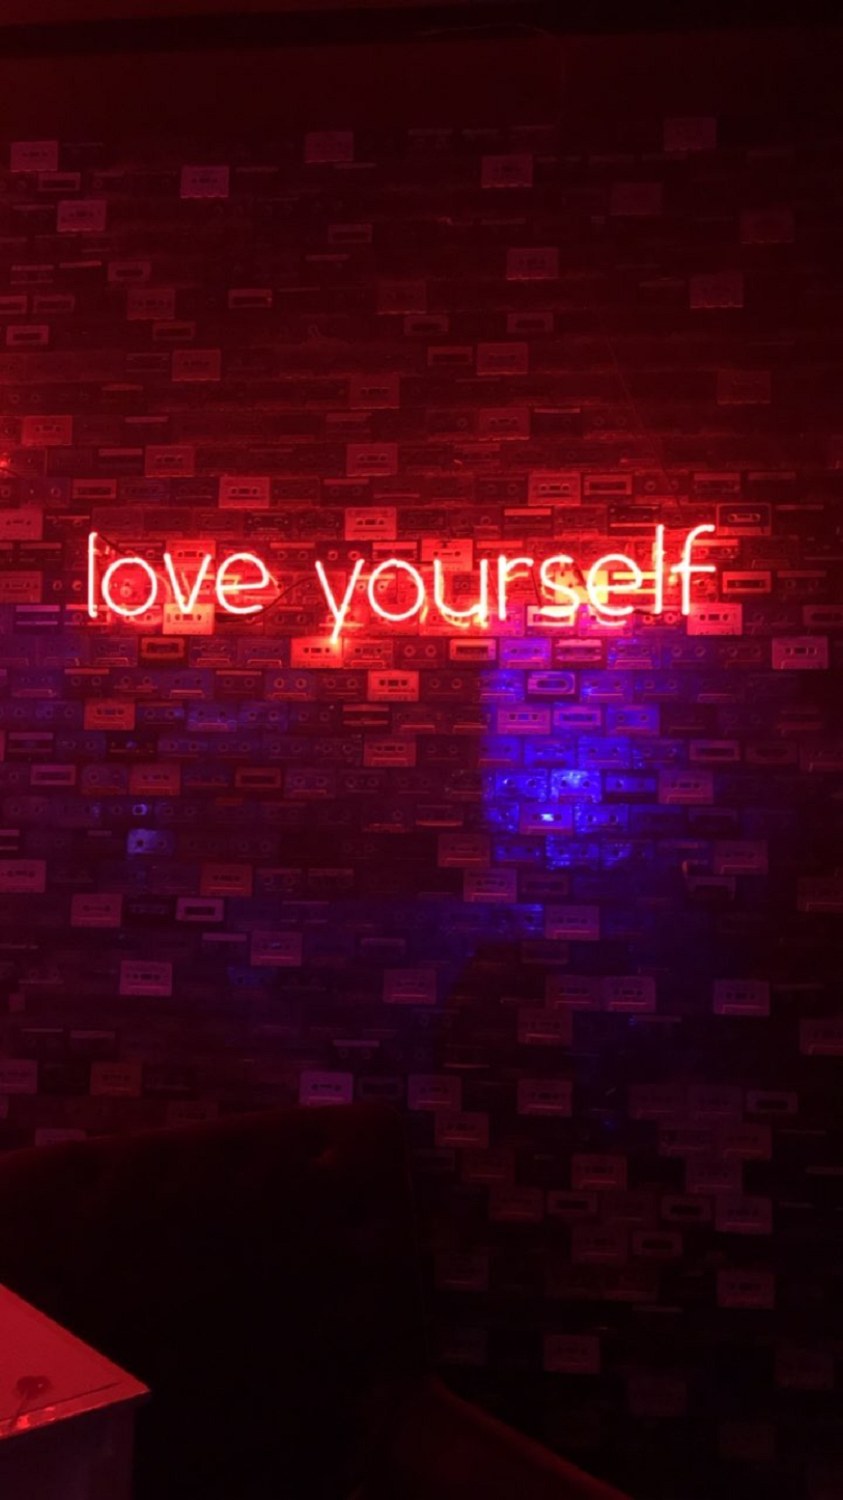 A neon sign that says love yourself on a brick wall - Light red